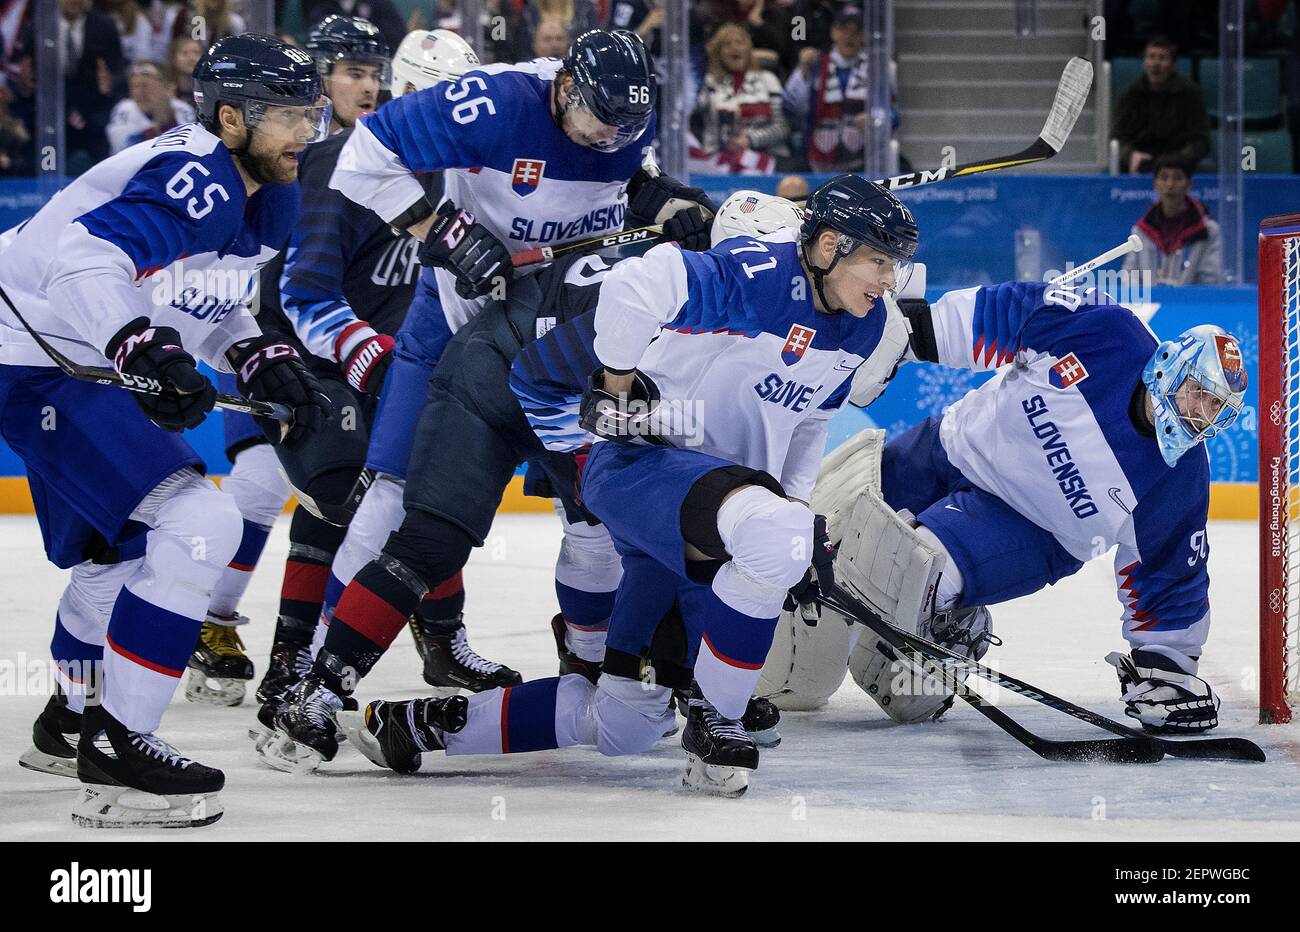 USA and Slovakia players chase the puck past Slovakia goalie Jan Laco (50) in the first period during group play on Friday, Feb. 16, 2018, at South Korea's Gangneung Hockey Centre in the Pyeongchang Winter Olympics. (Photo by Carlos Gonzalez/Minneapolis Star Tribune/TNS/Sipa USA) Stock Photo